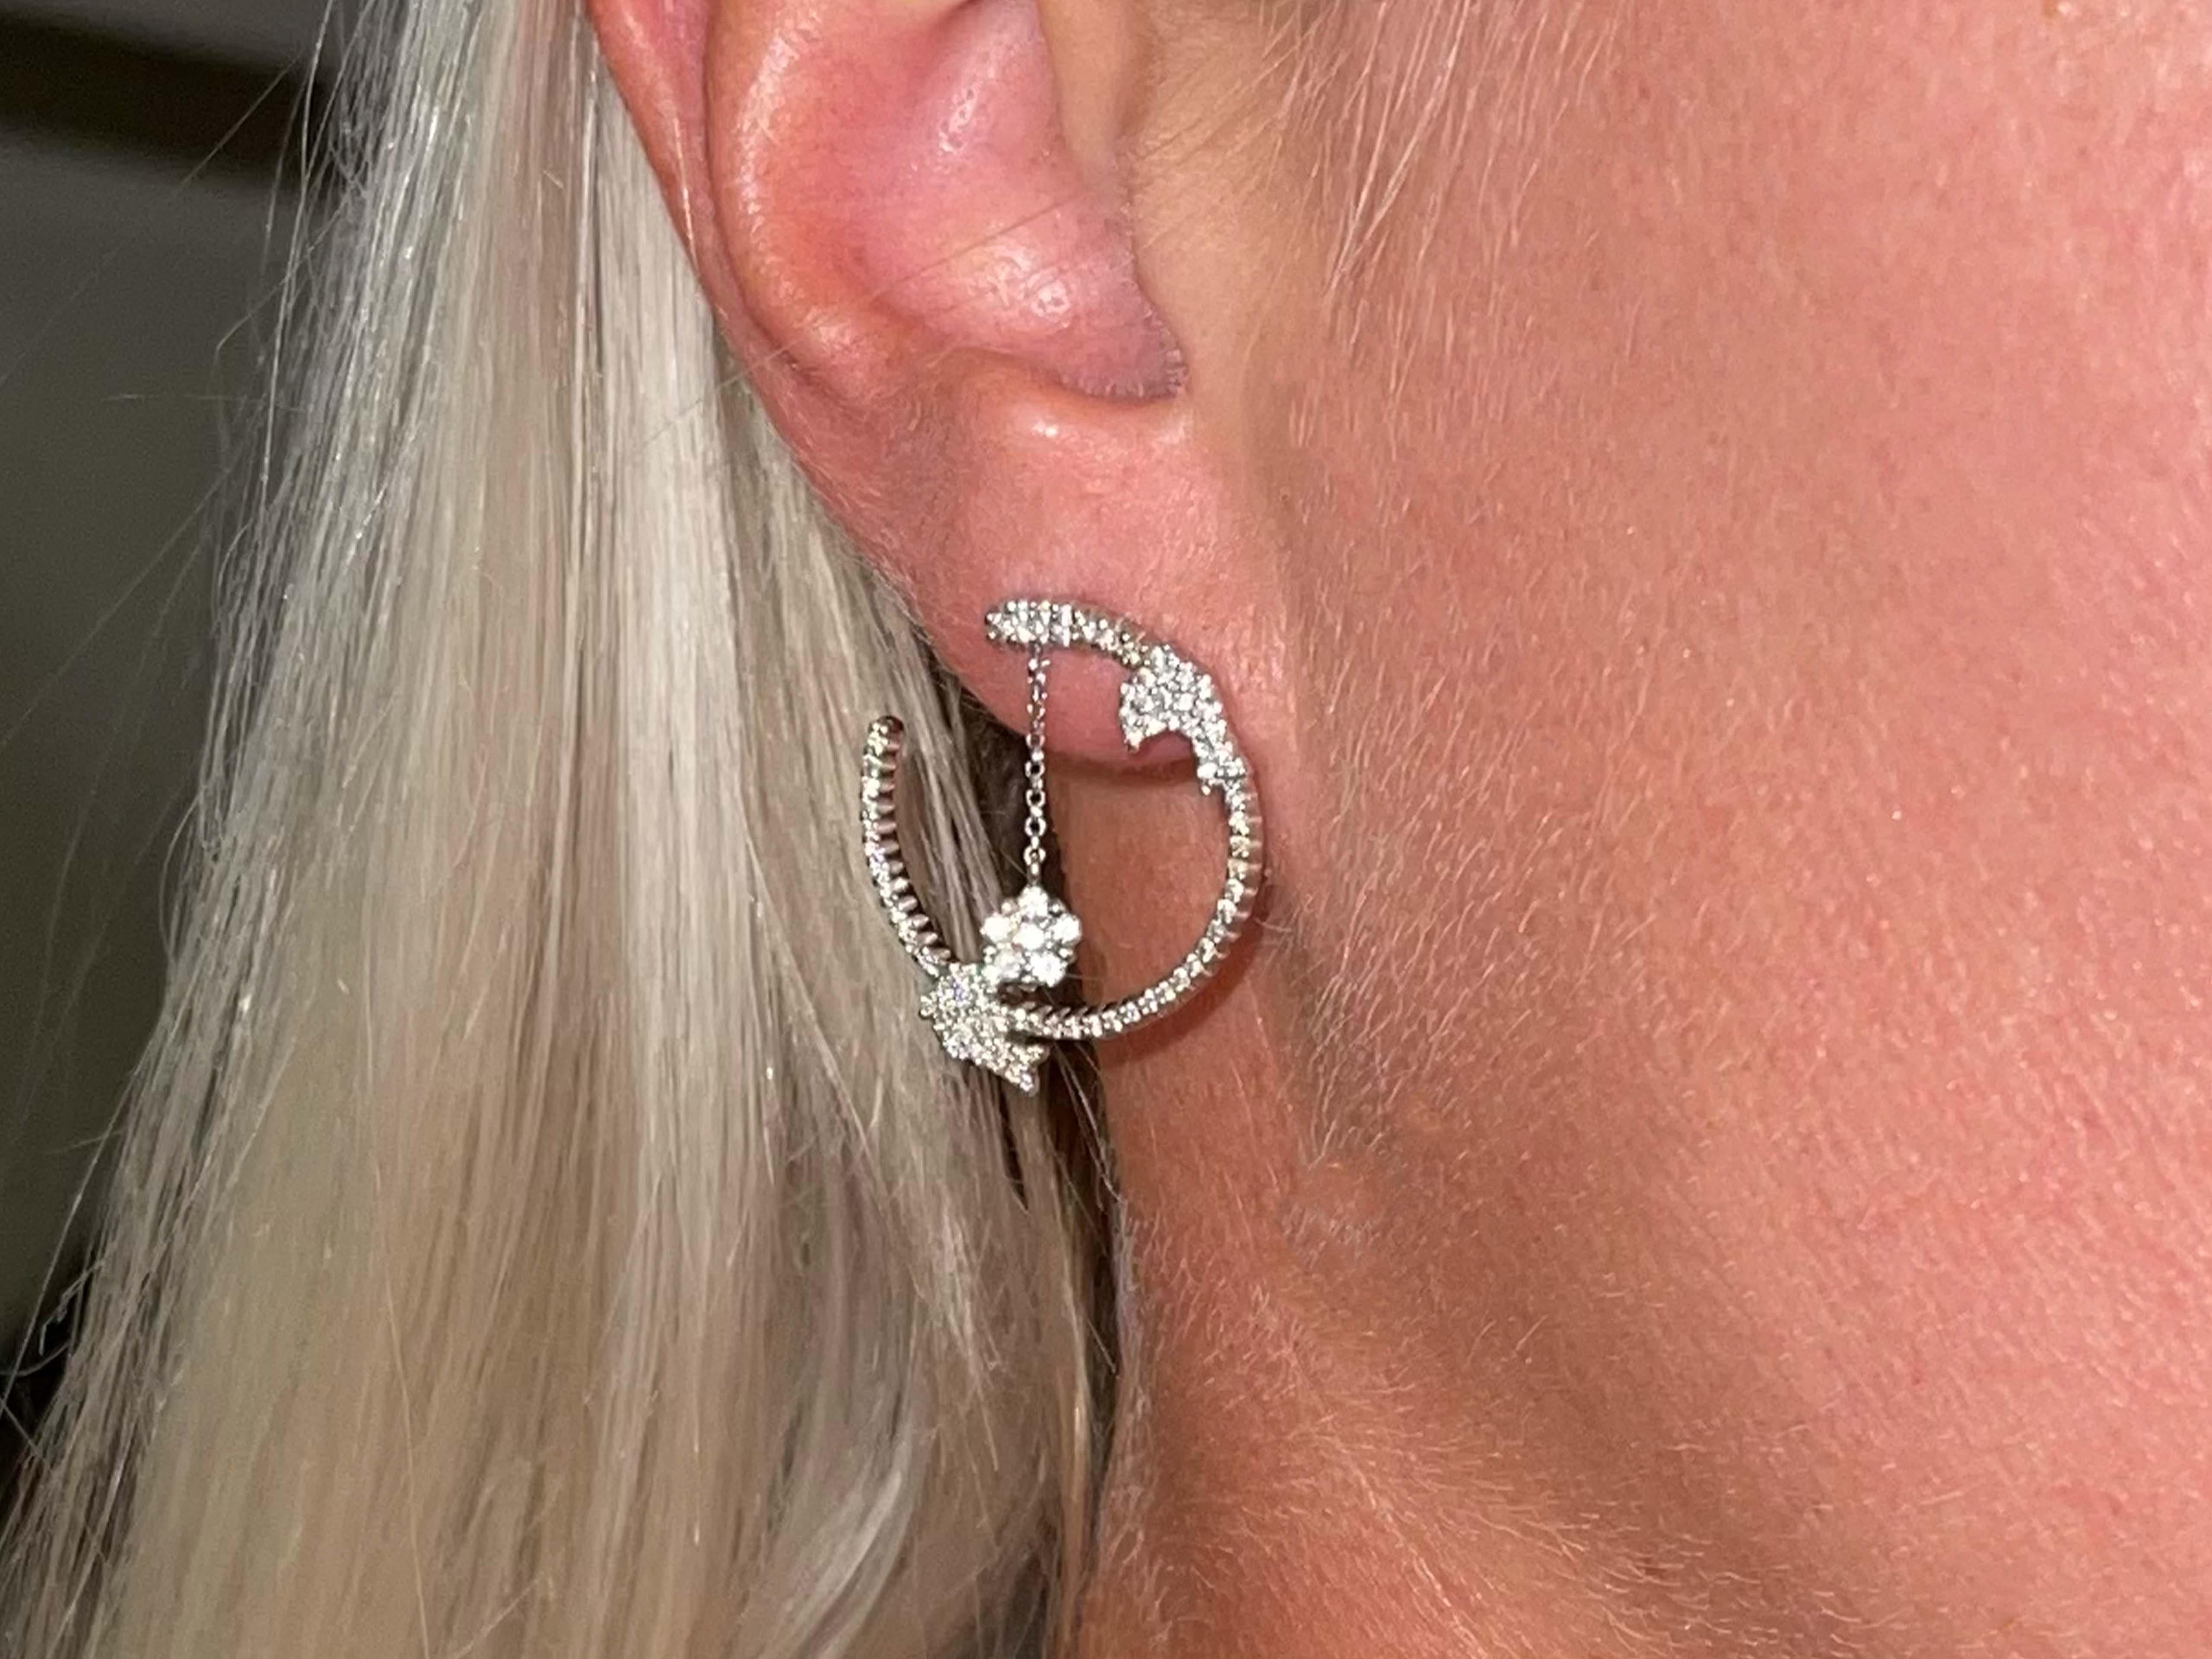 Crafted in 18K white gold, 86 round brilliant cut diamonds are set on each hoop creating a lifetime of timelessness. Two dolphins are perched on each hoop with a dangly flower in the middle giving the earring life and movement. The diamonds are G in